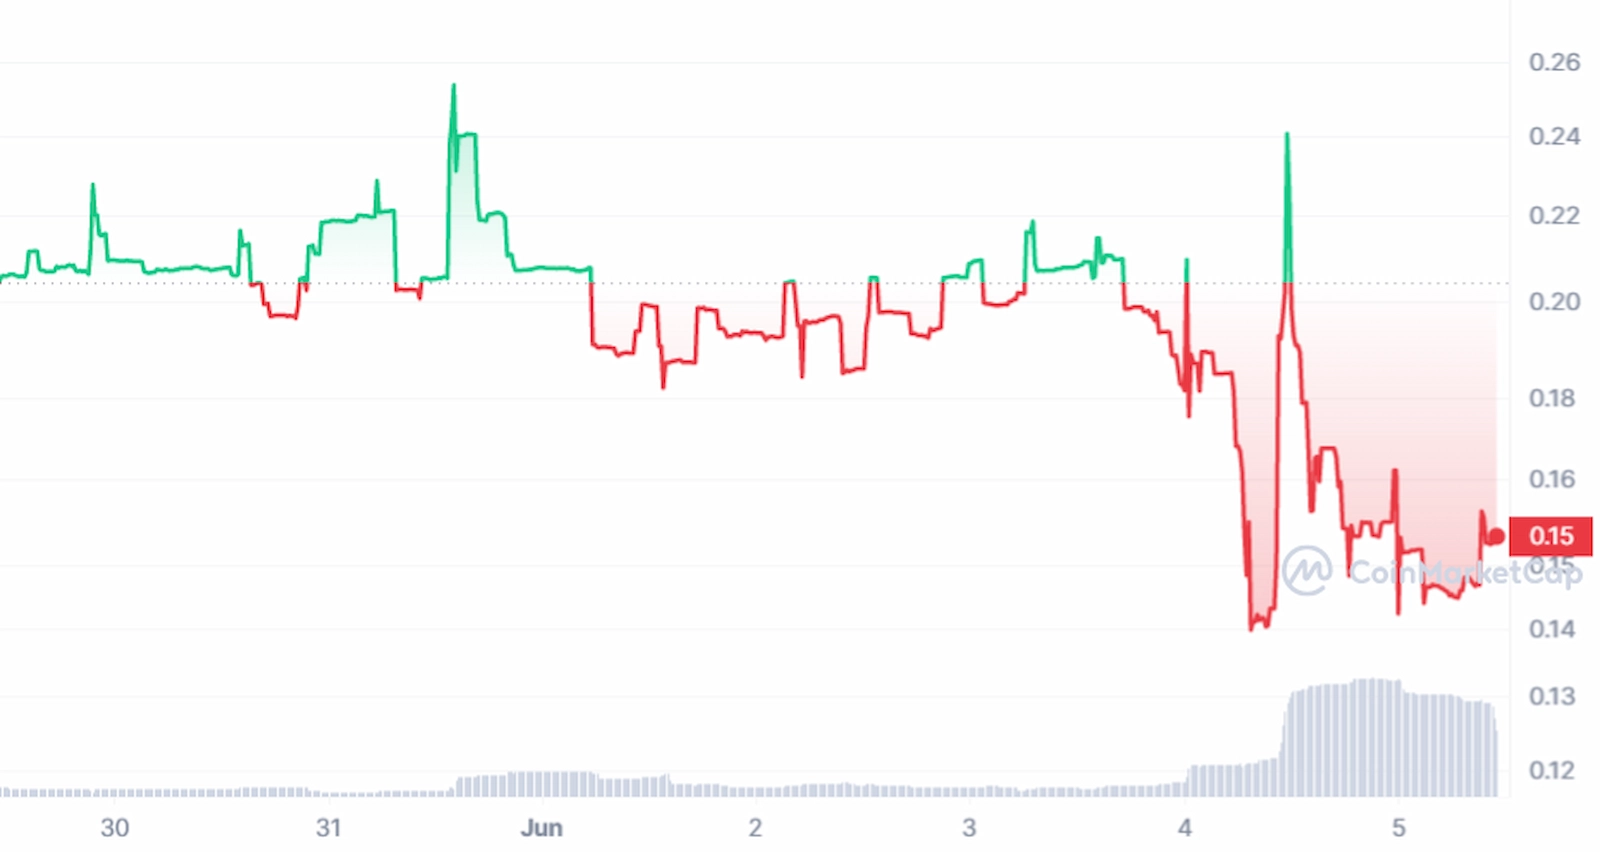 AWCUSD price chart for the past 7 days. 